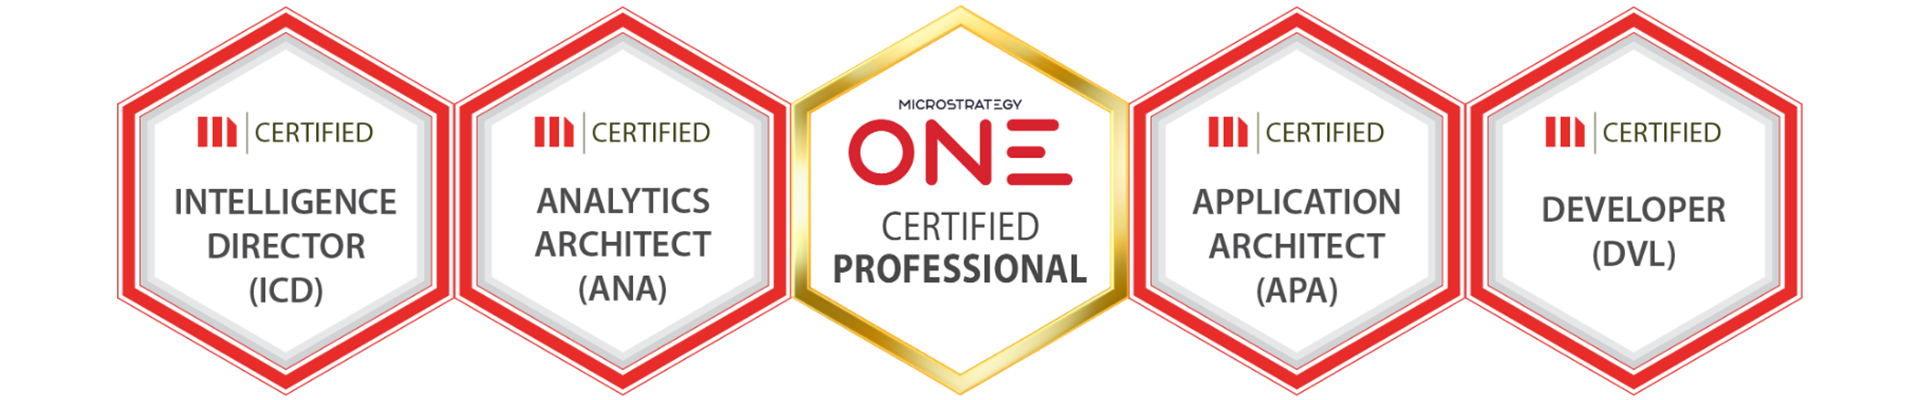 Microstrategy Professional Services